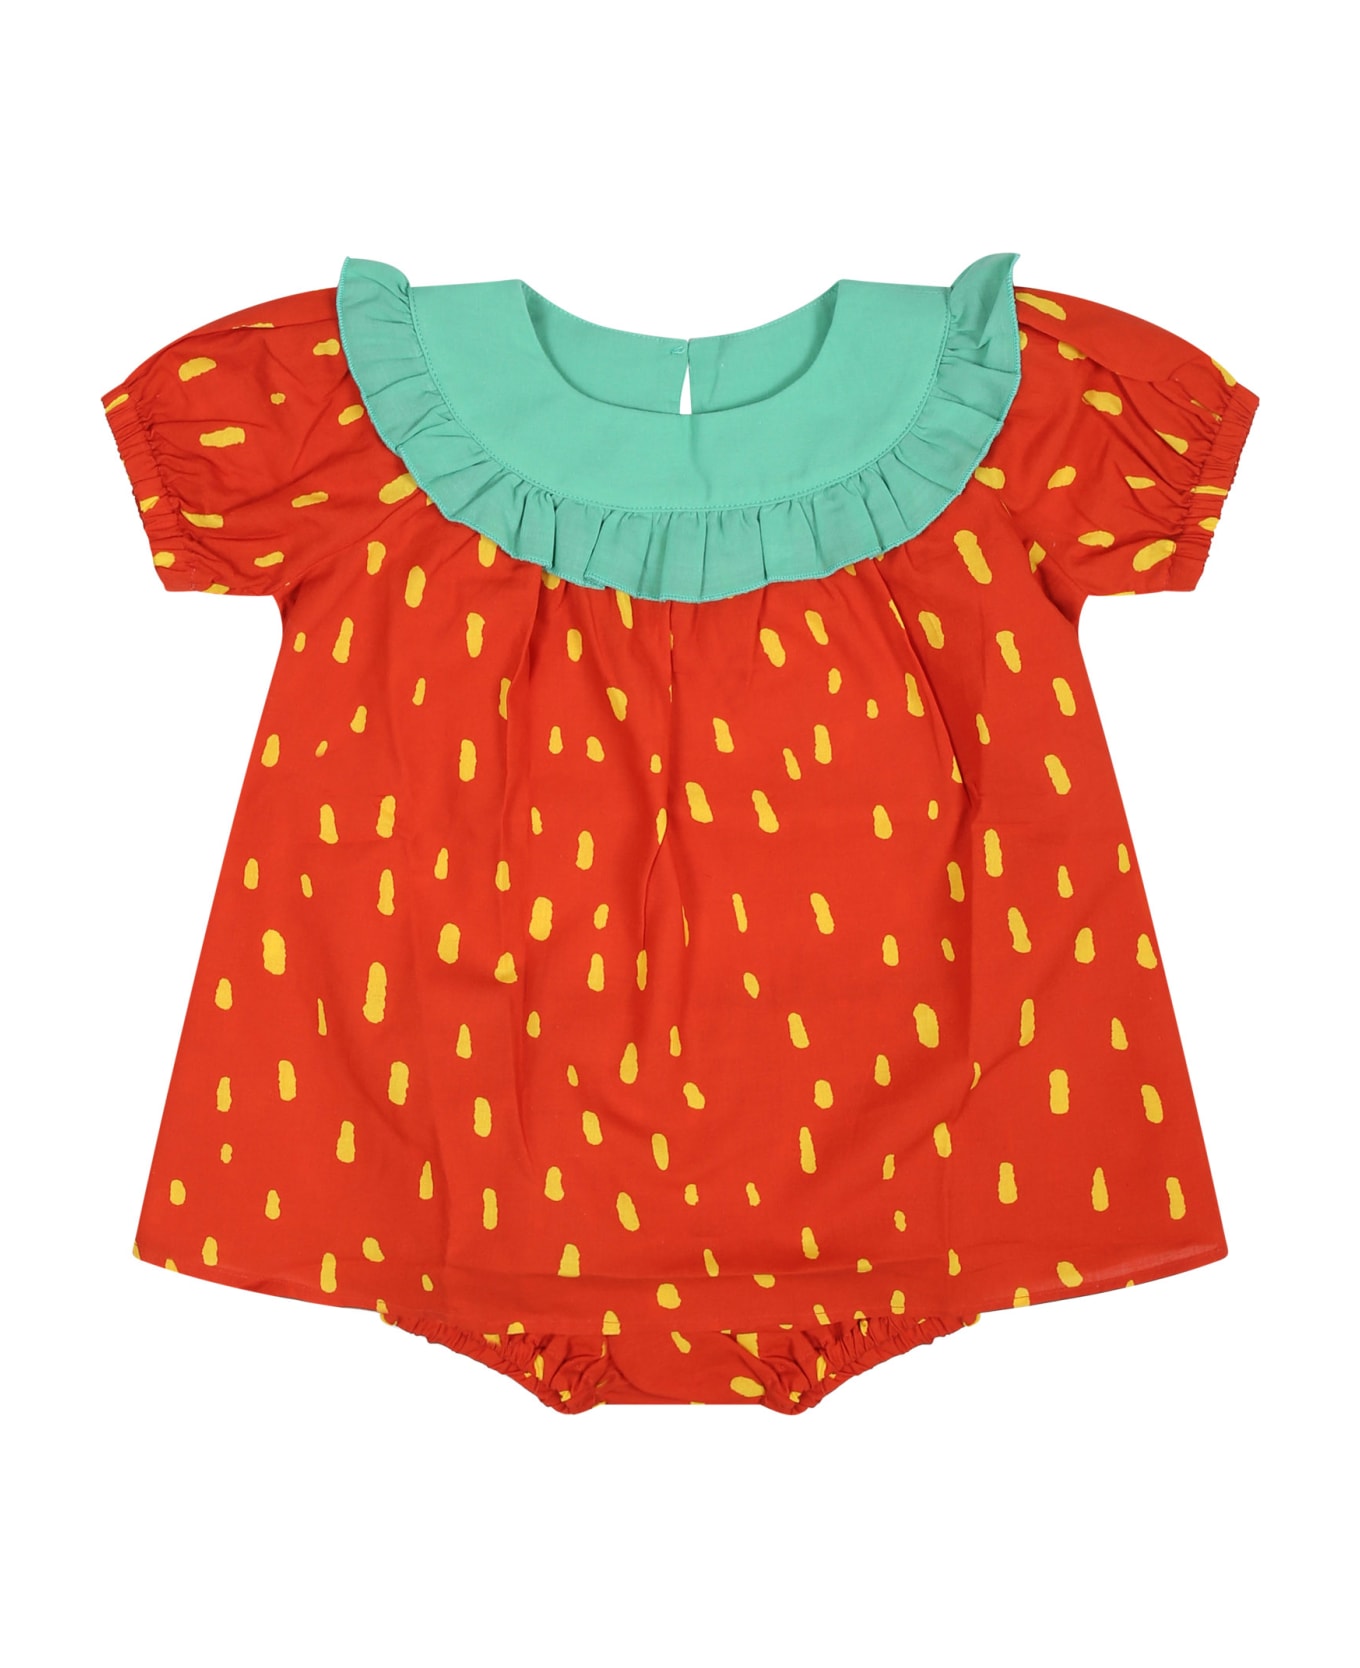 Stella McCartney Kids Red Dress For Baby Girl With All-over Print - Red